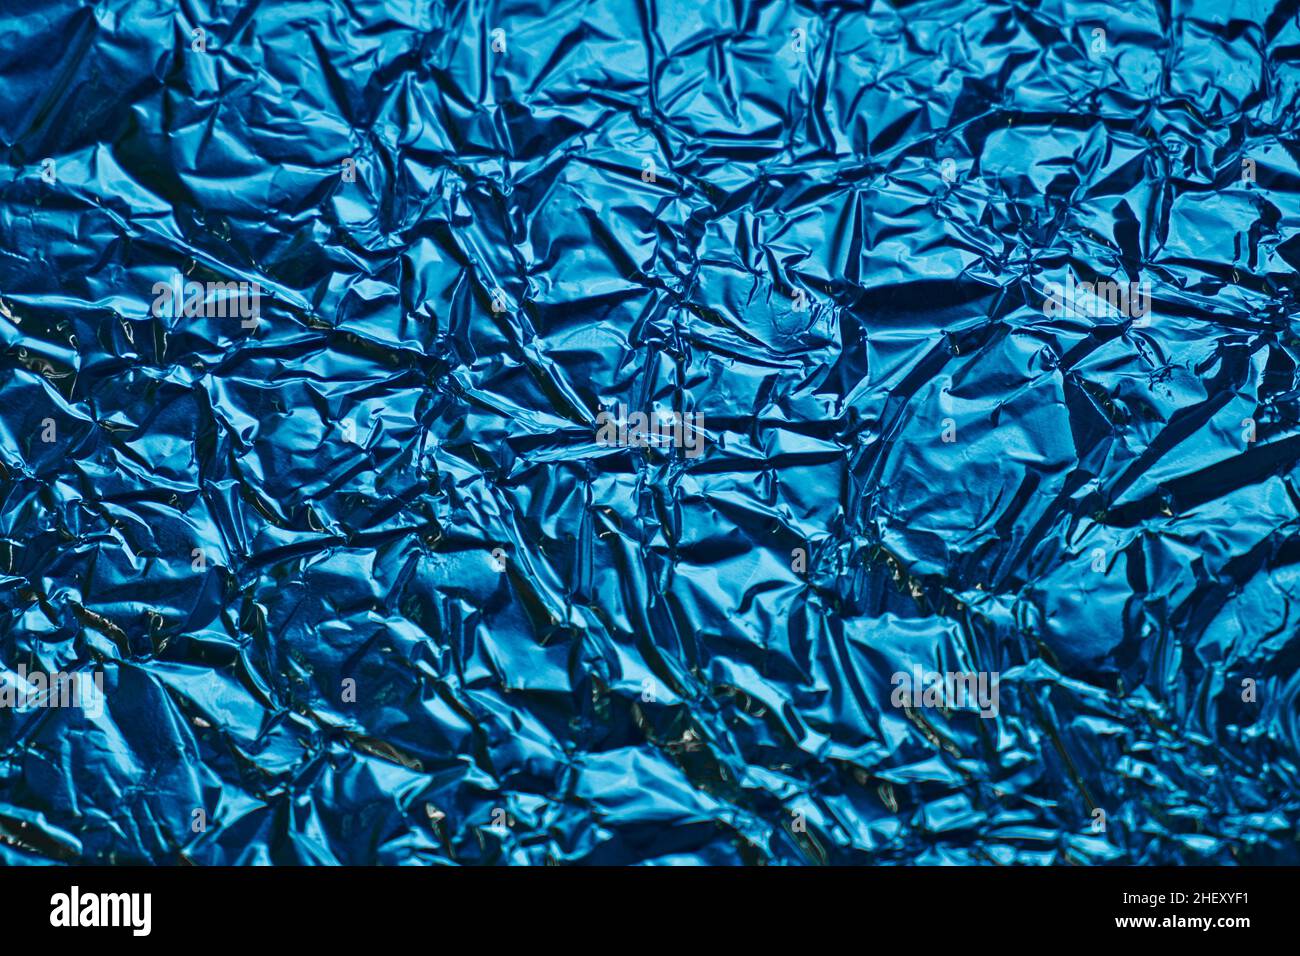 Close-up of crumpled silver aluminum foil texture in blue tone. Abstract background for design. Stock Photo